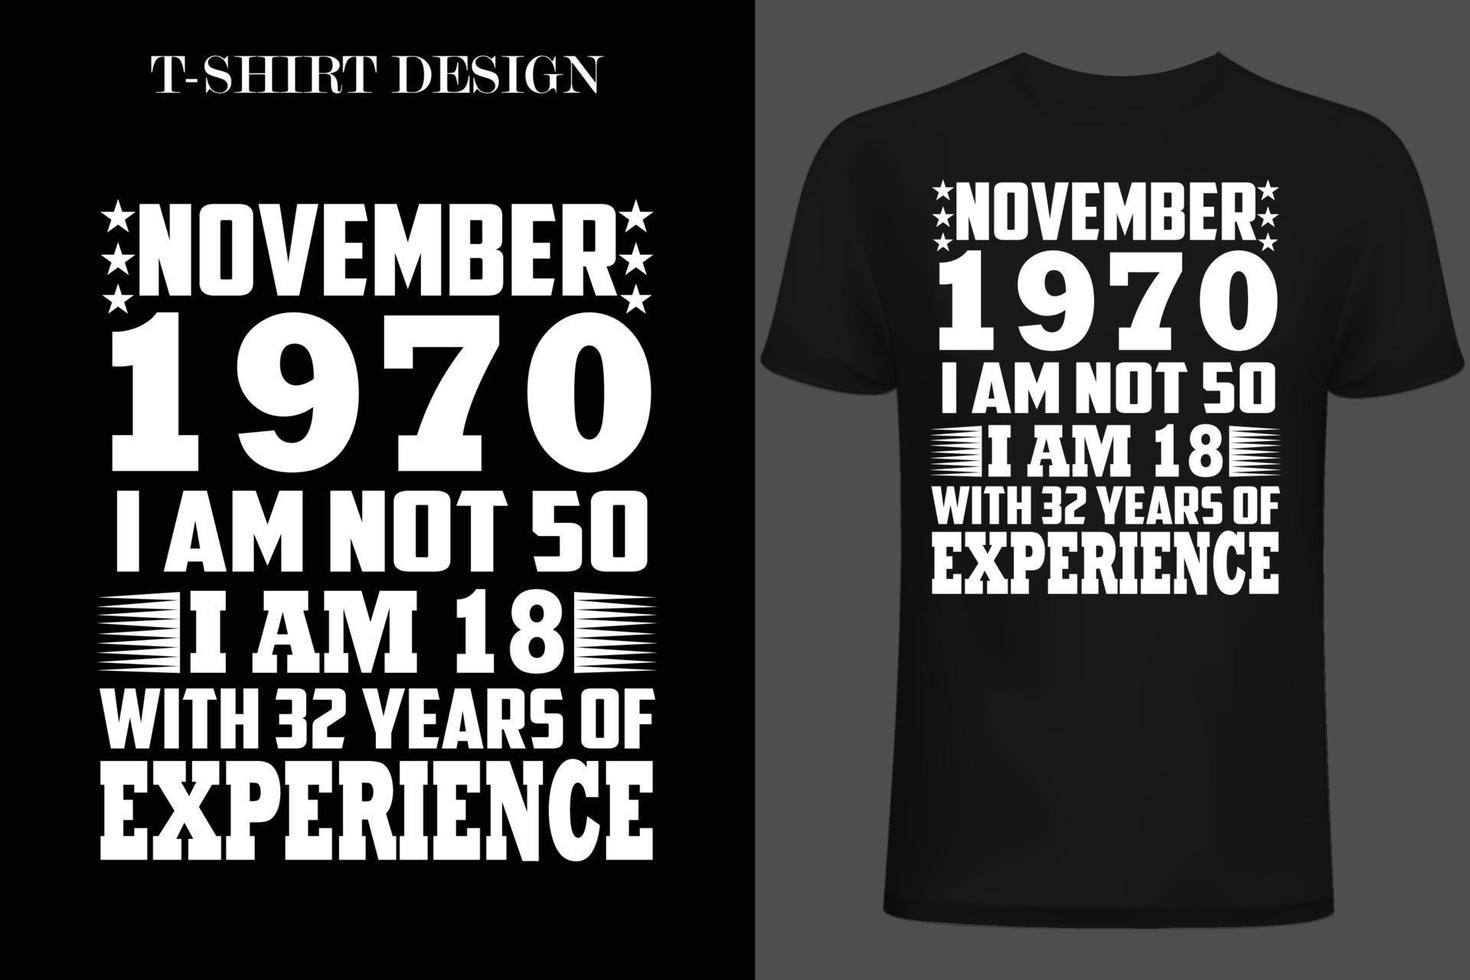 november 1970 iam not 50 iam 18 with 32 years of experince vector